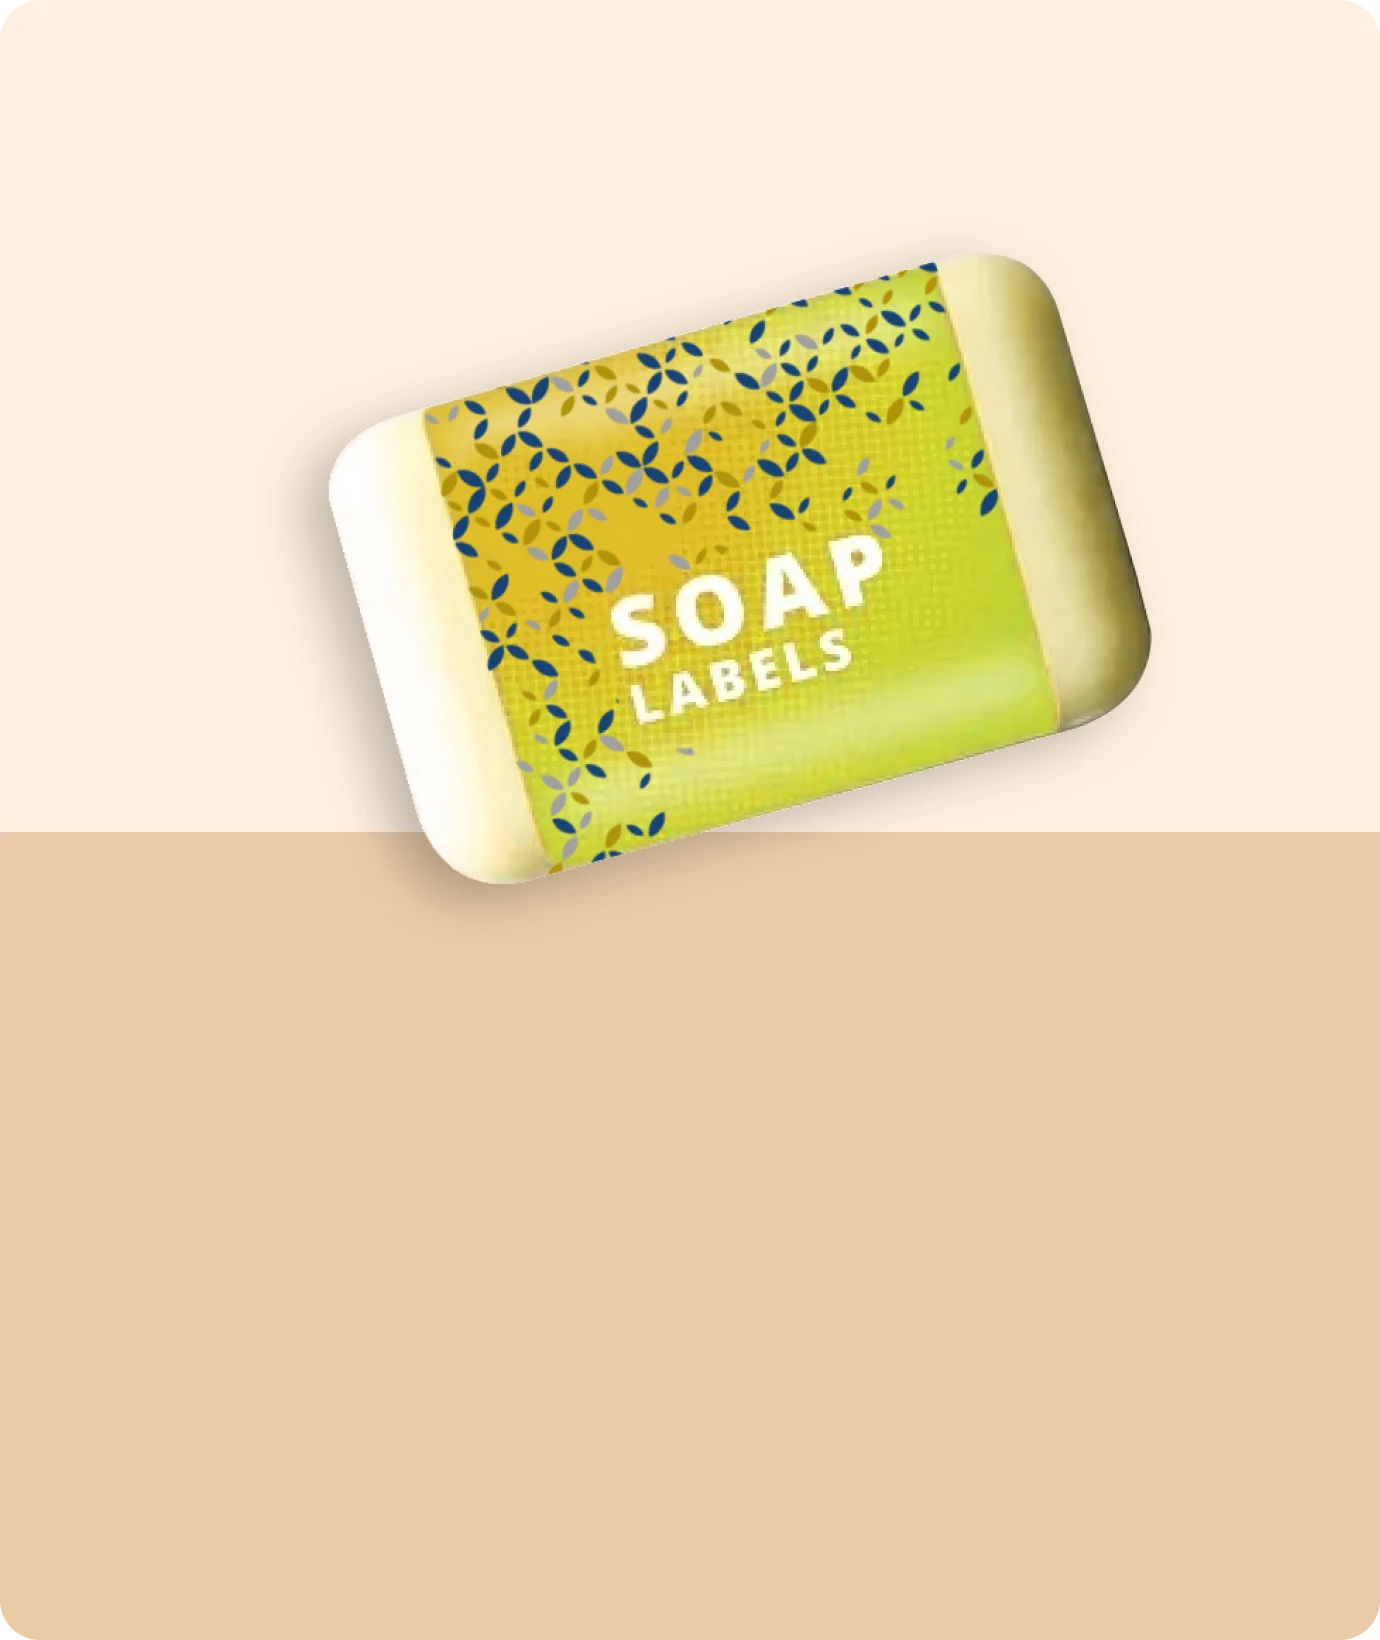 Soap Bar Labels related product image | The Box Lane